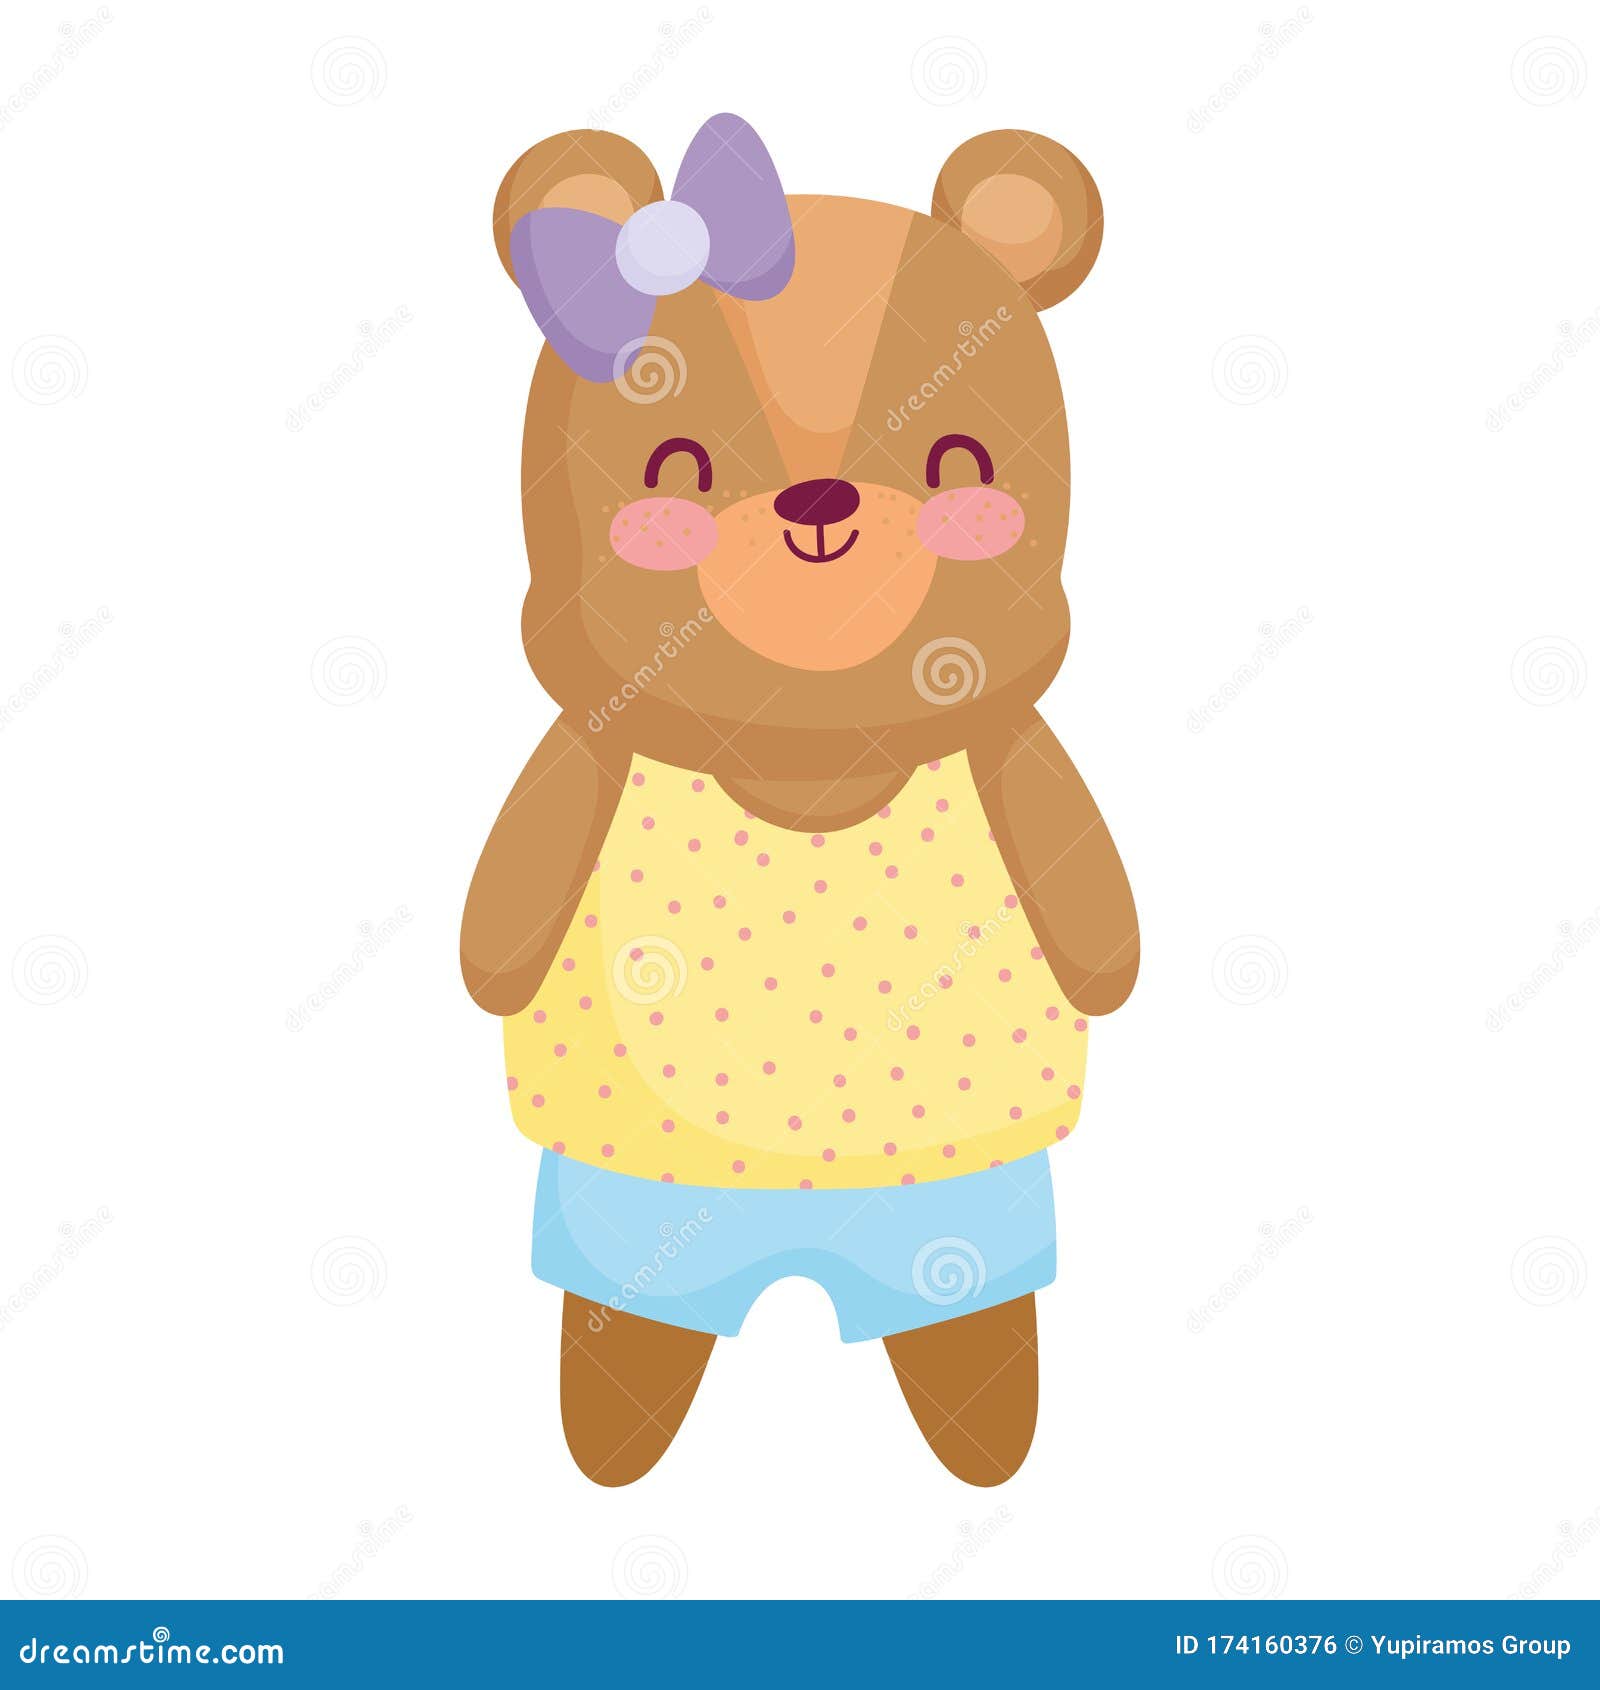 Cute Female Teddy Wearing Clothes Animal Cartoon Stock Vector -  Illustration of positive, female: 174160376